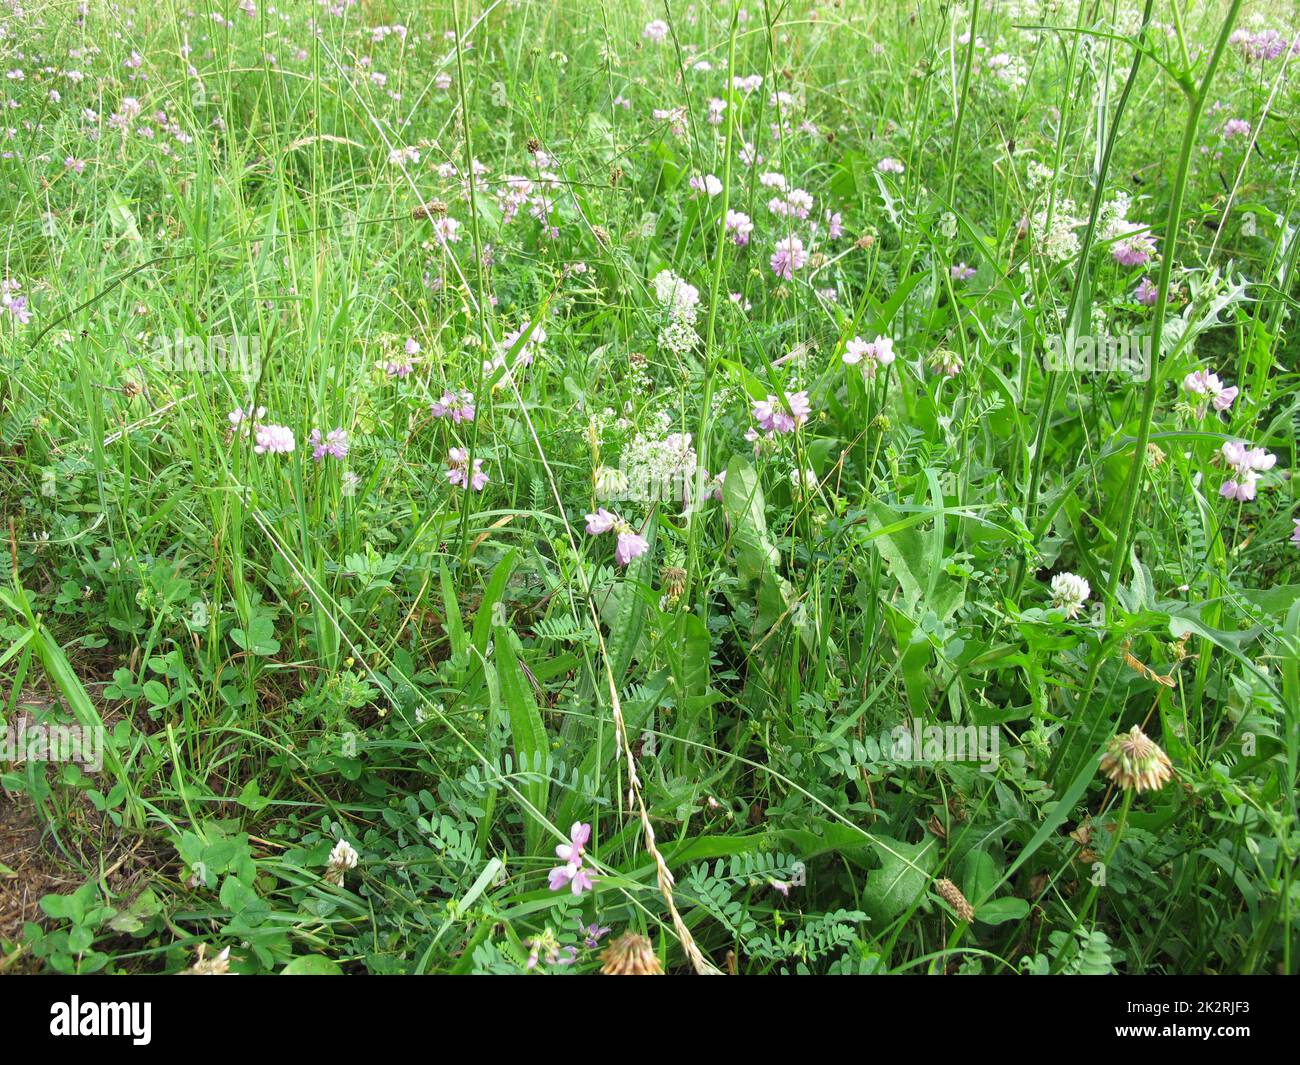 Wildflower meadow with Crownvetch and White Bedstraw Stock Photo